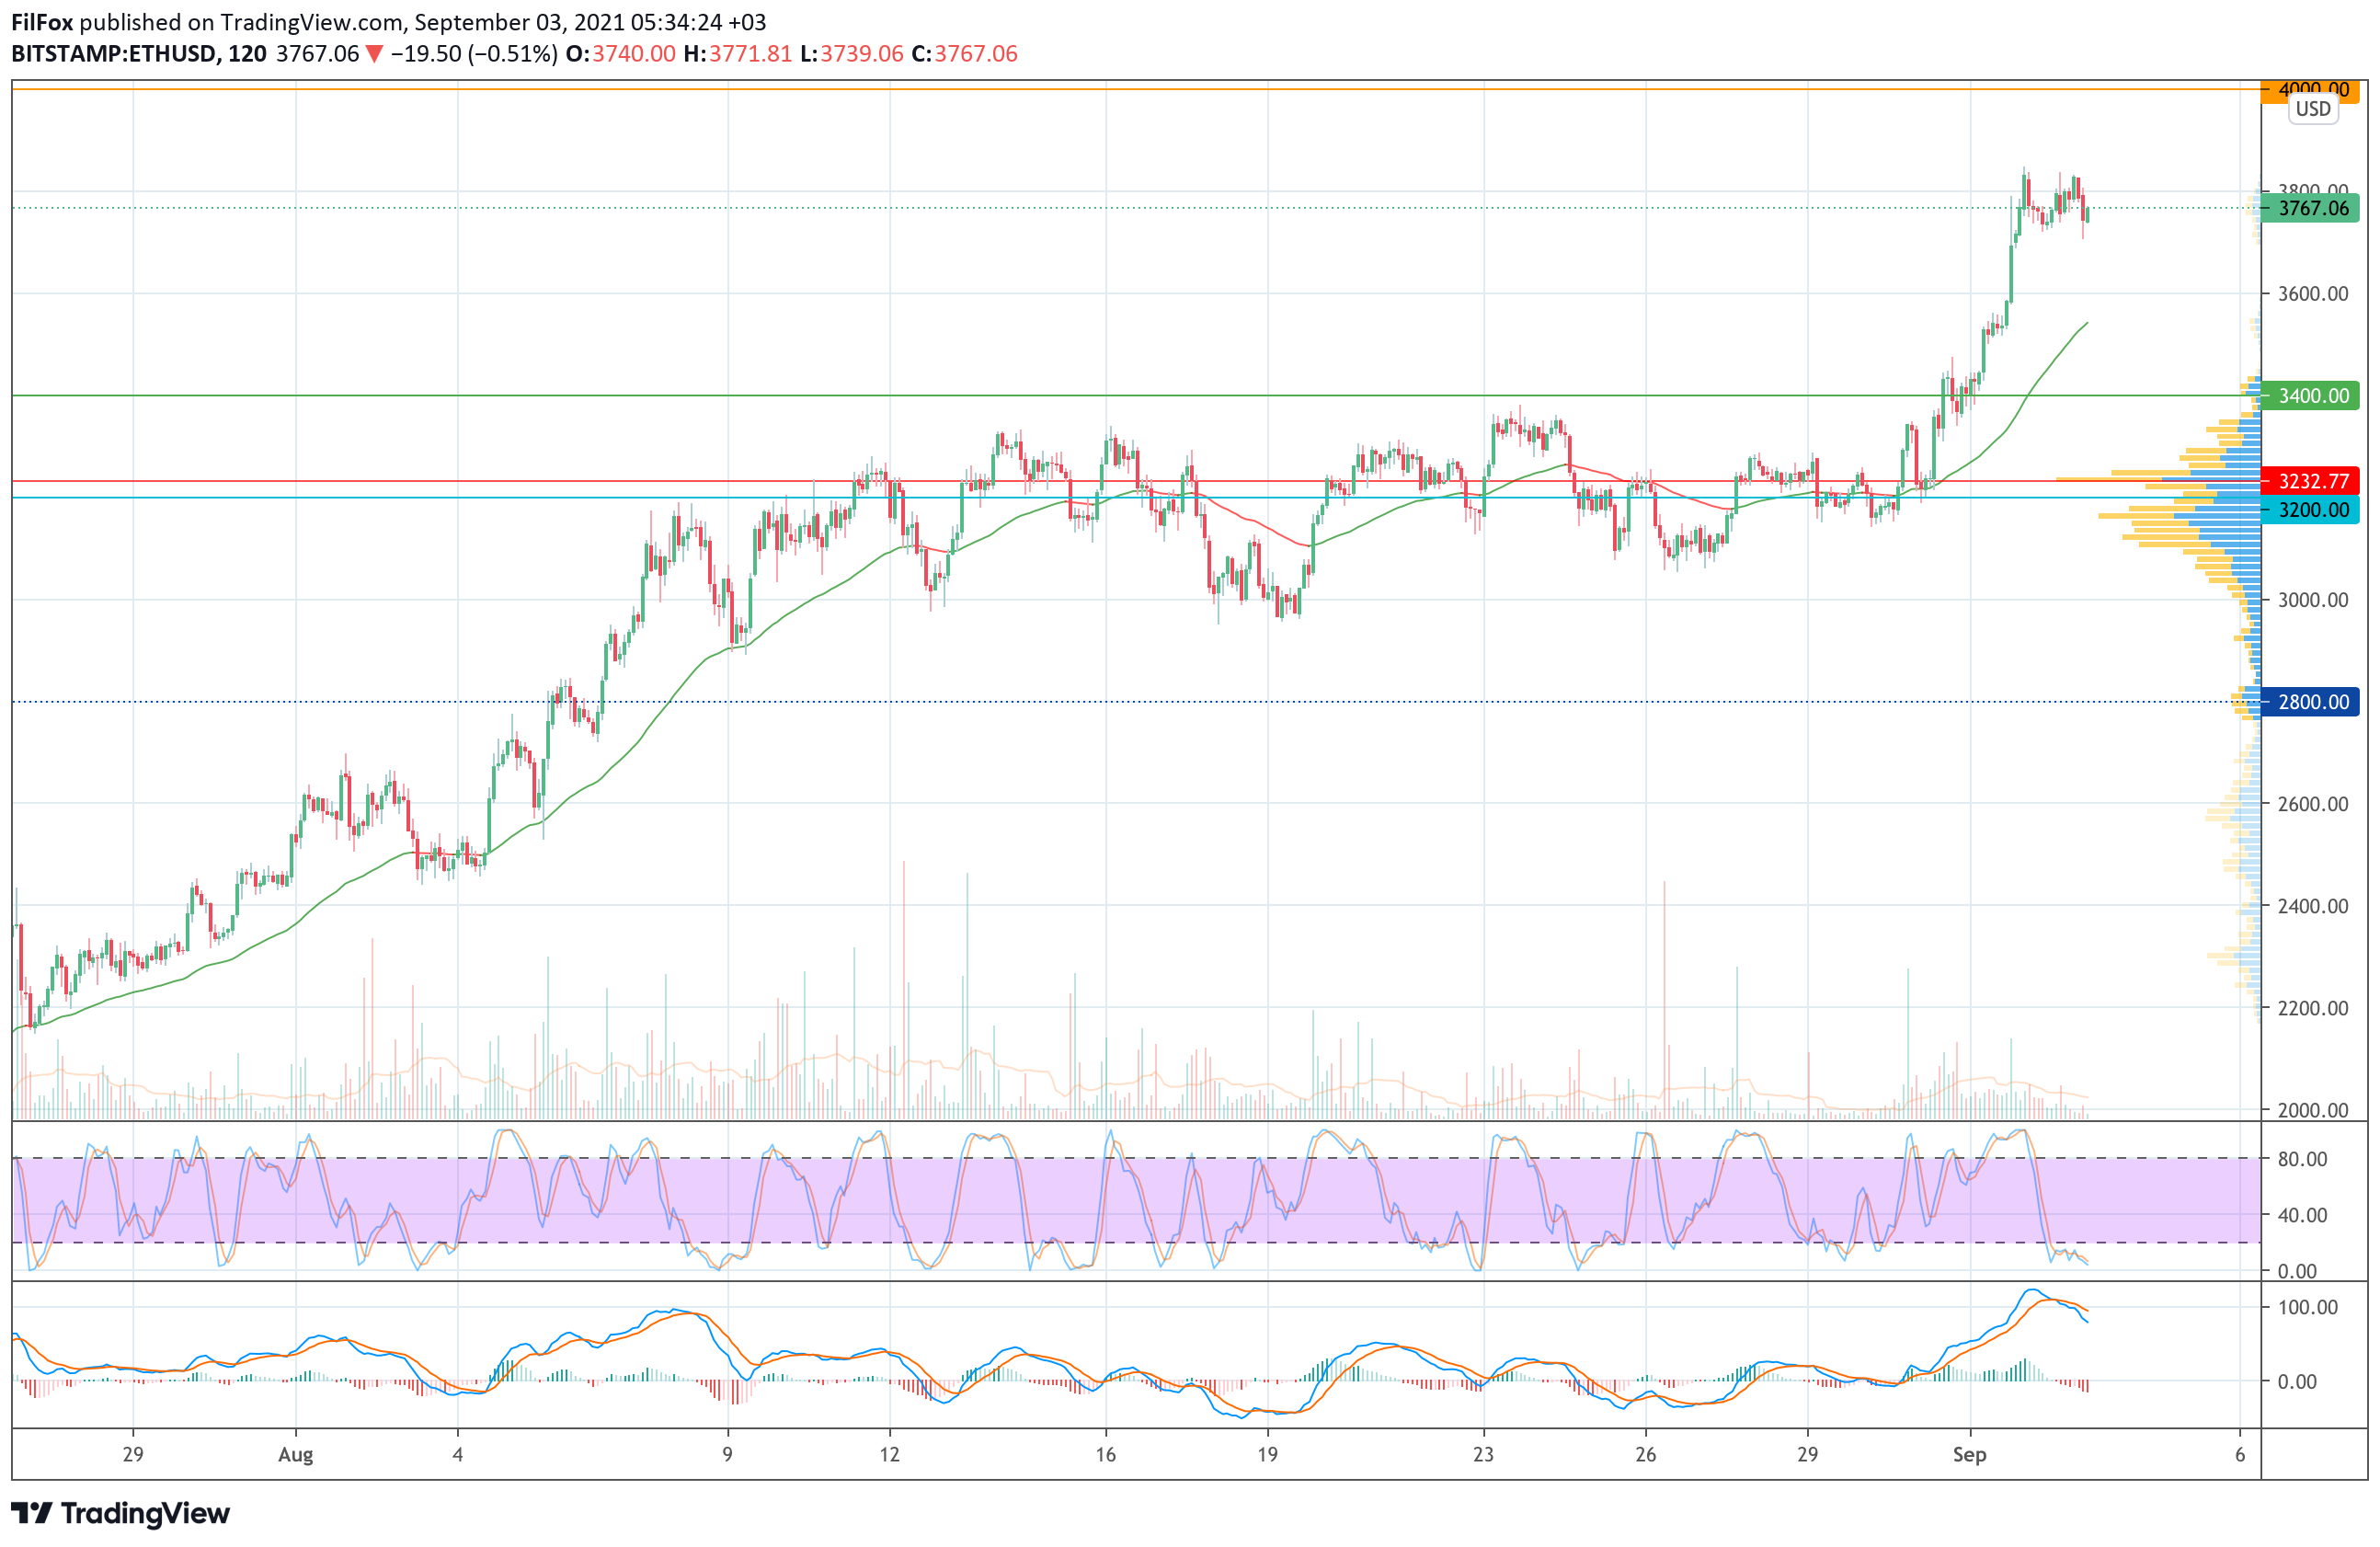 Analysis of the prices of Bitcoin, Ethereum, XRP for 09/03/2021